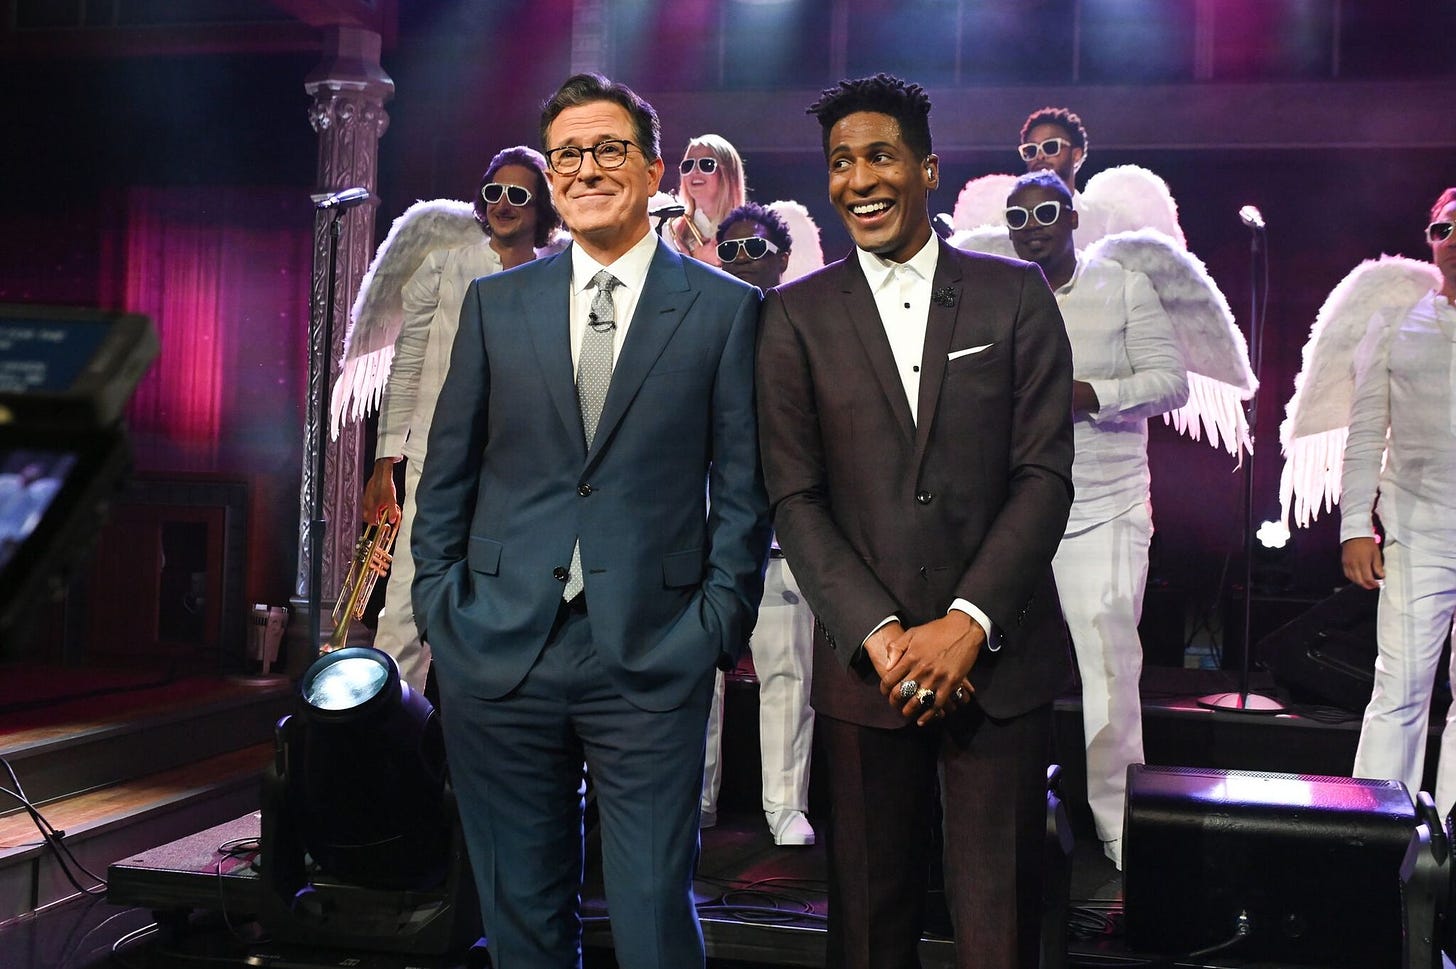 Colbert returns to The Late Show - a turning point in American culture